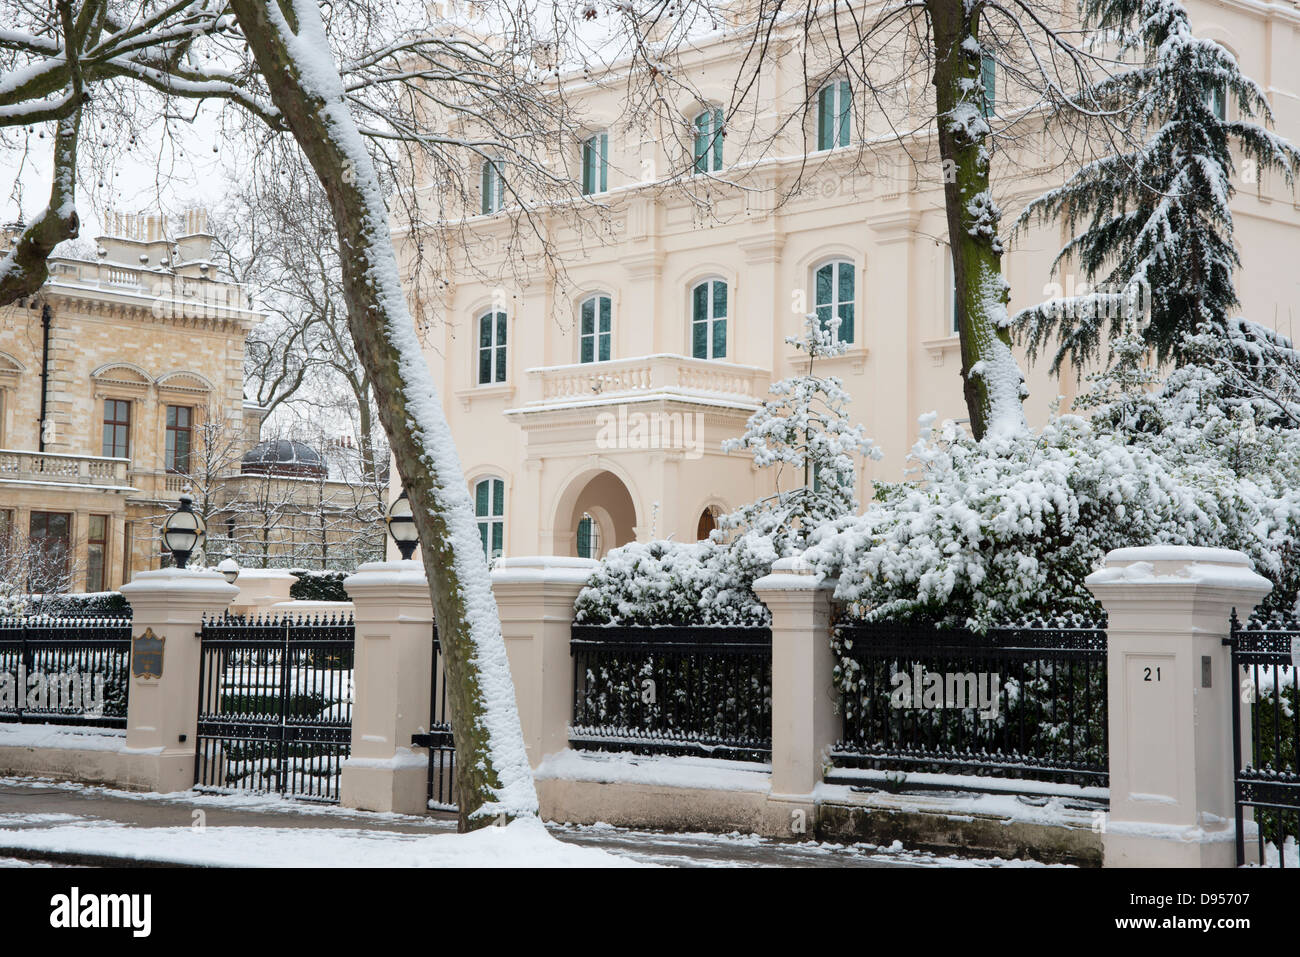 Snow in trees in front of grand mansions in Palace Gate, London, UK Stock Photo